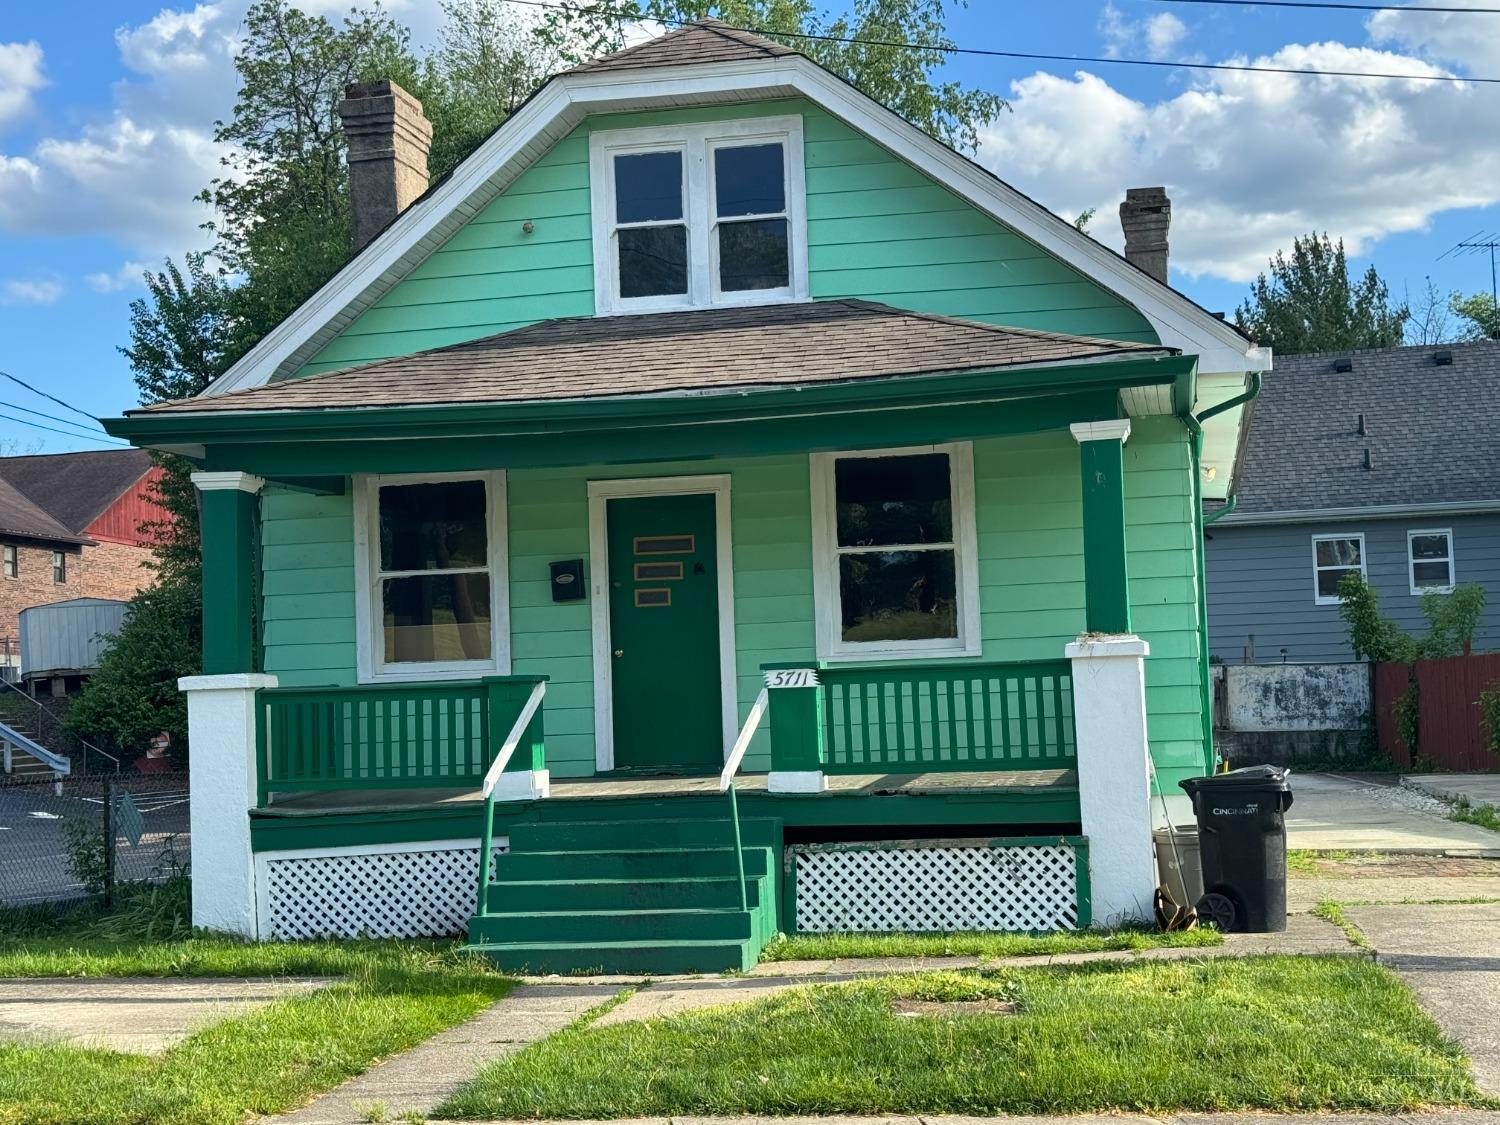 Uncover the potential of this charming 2- bedroom fixer upper! With a little TLC, transform this house into the perfect home. Embrace the opportunity to customize and add value.